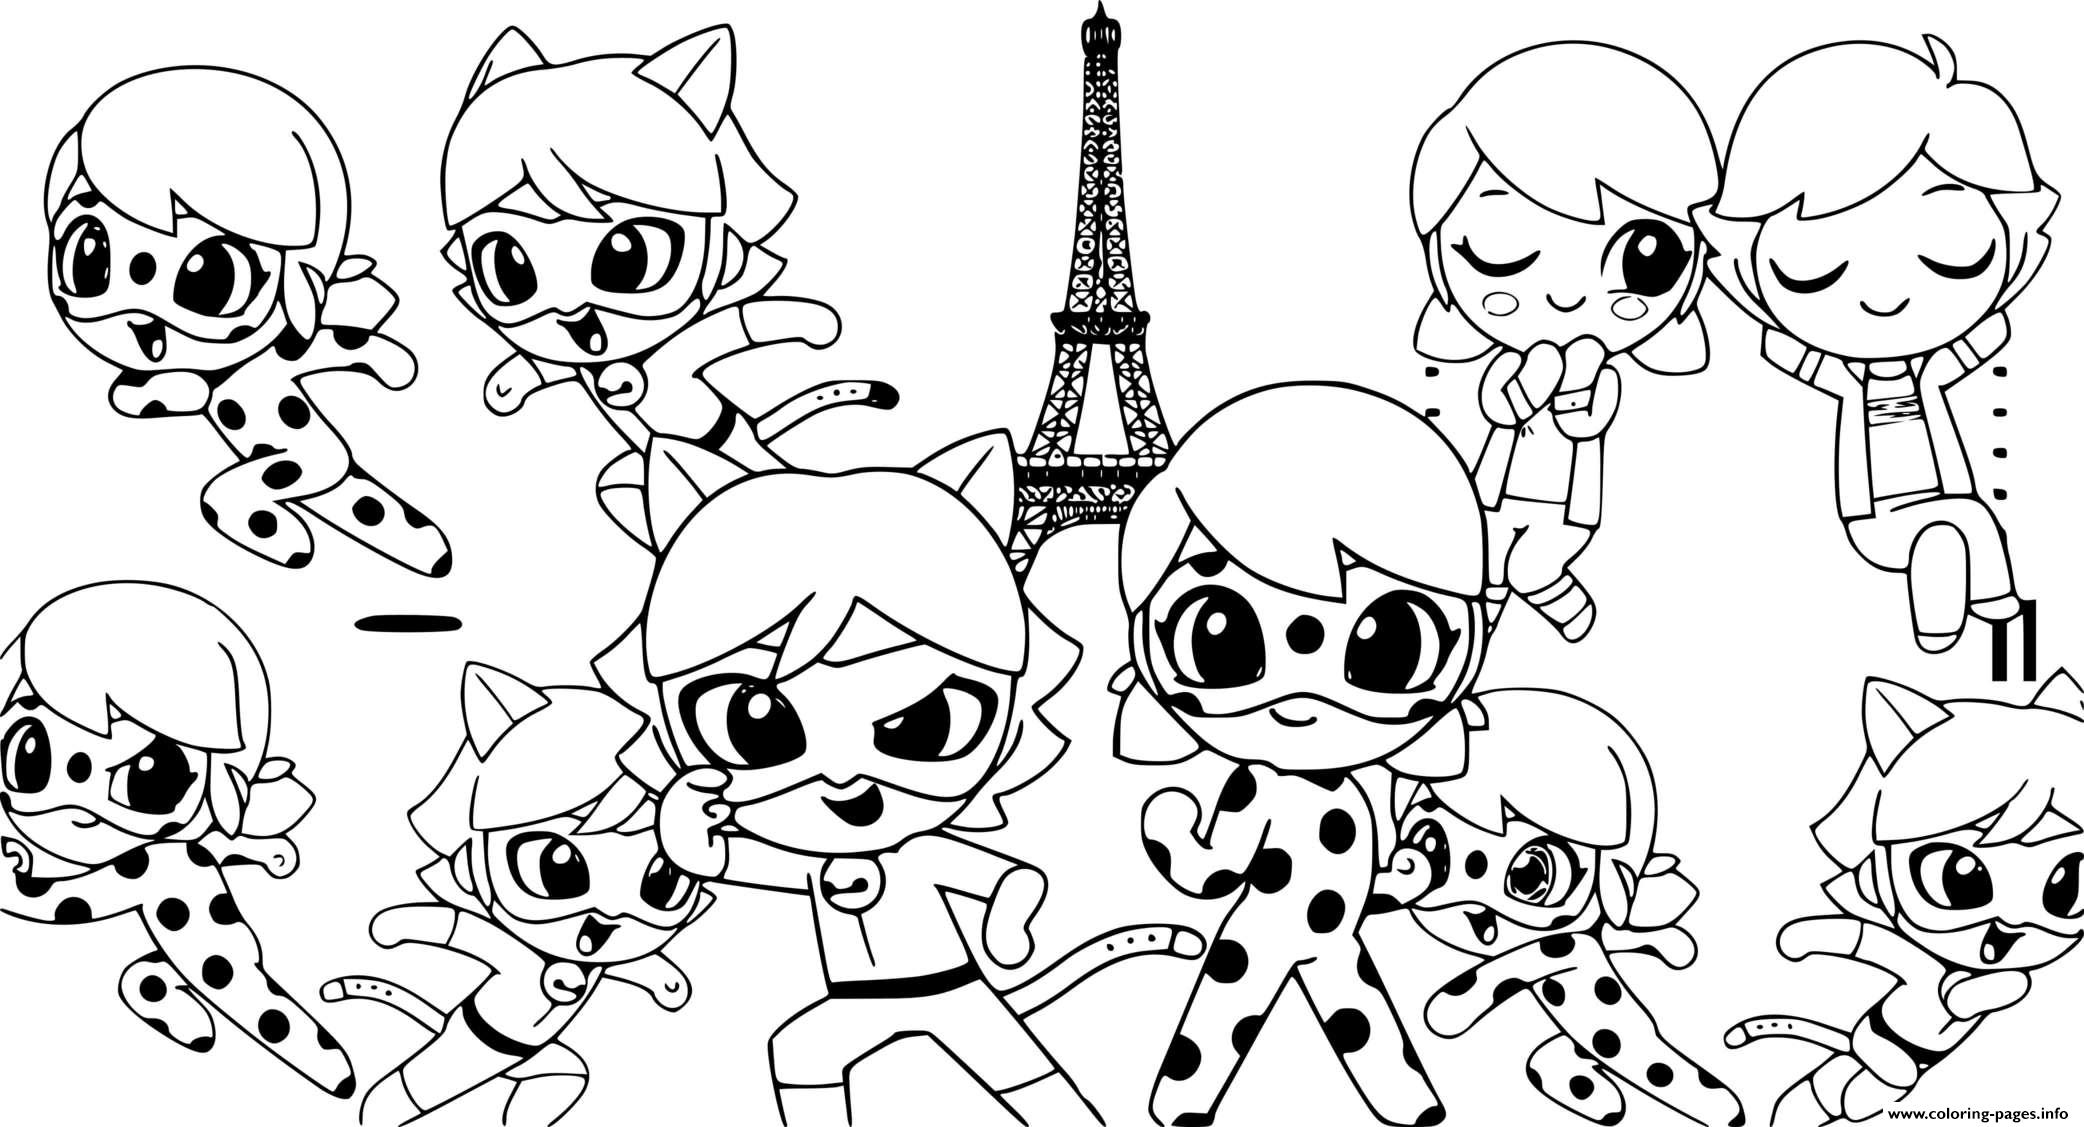 Download Cute Multimouse Chat Noir Kawaii Coloring Pages Printable